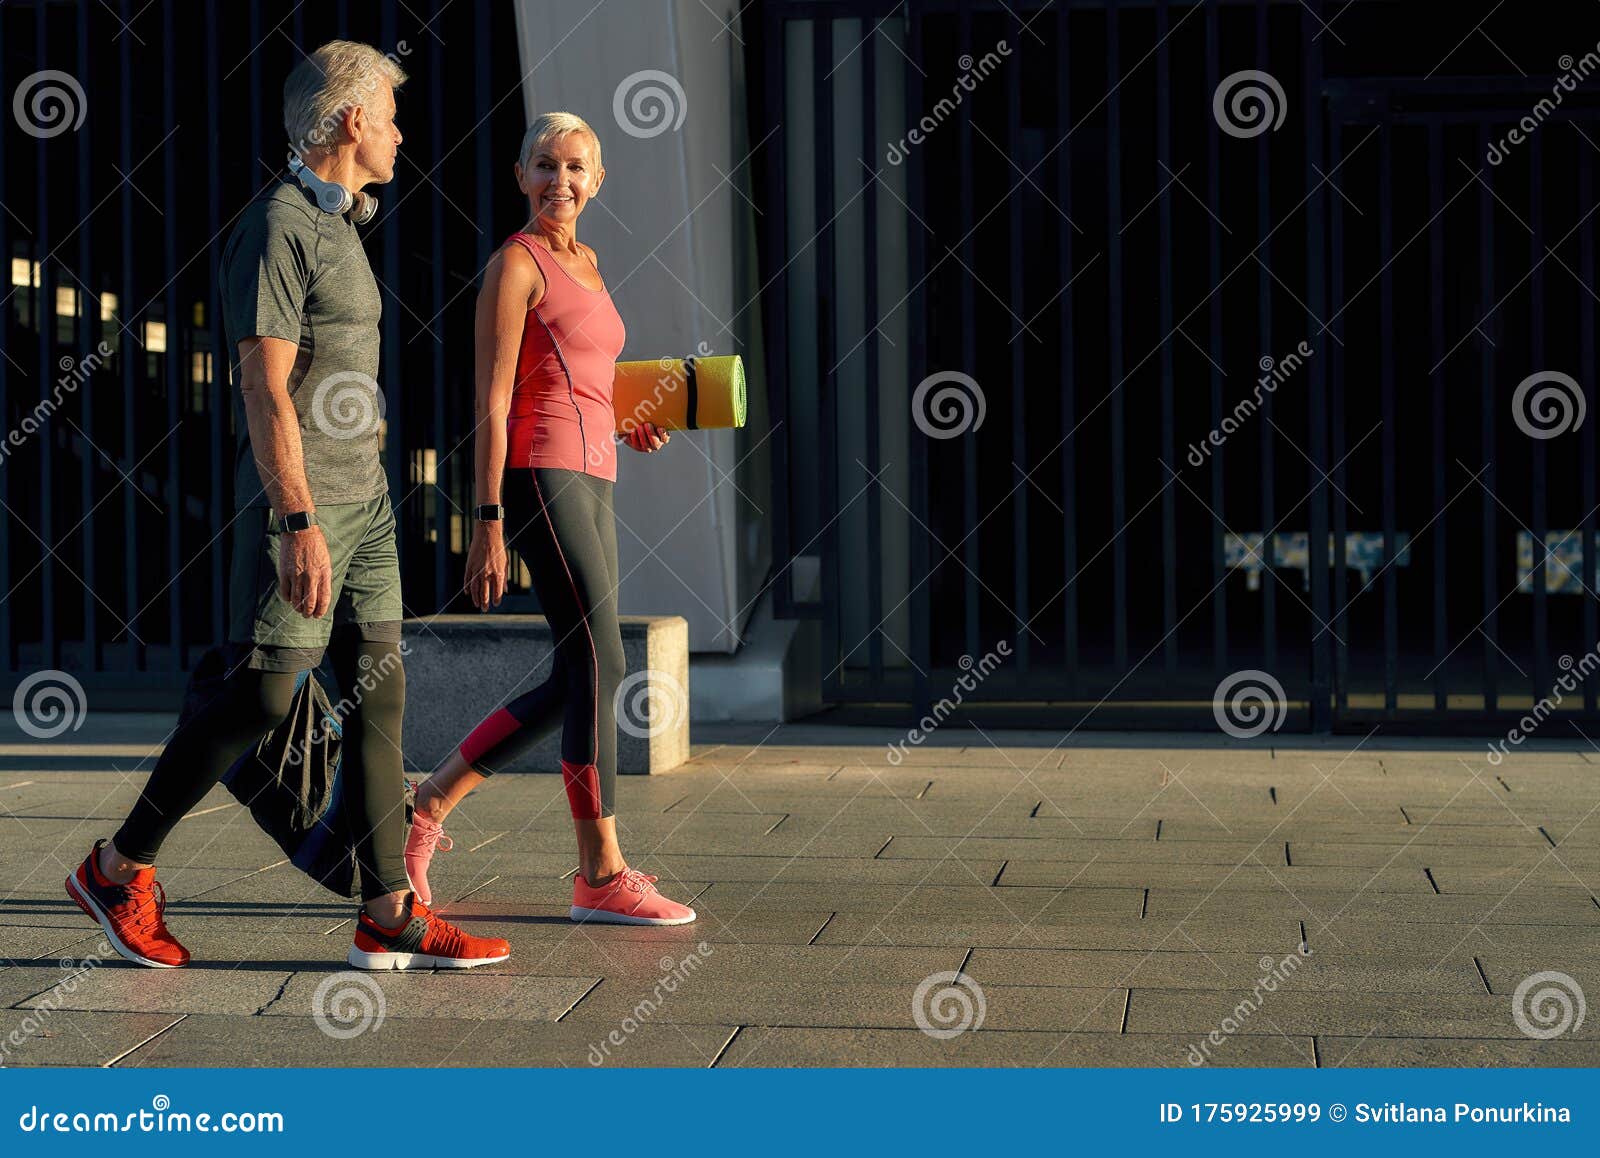 https://thumbs.dreamstime.com/z/love-fitness-side-view-active-middle-aged-couple-sports-clothing-going-to-exercise-together-outdoors-love-fitness-side-175925999.jpg